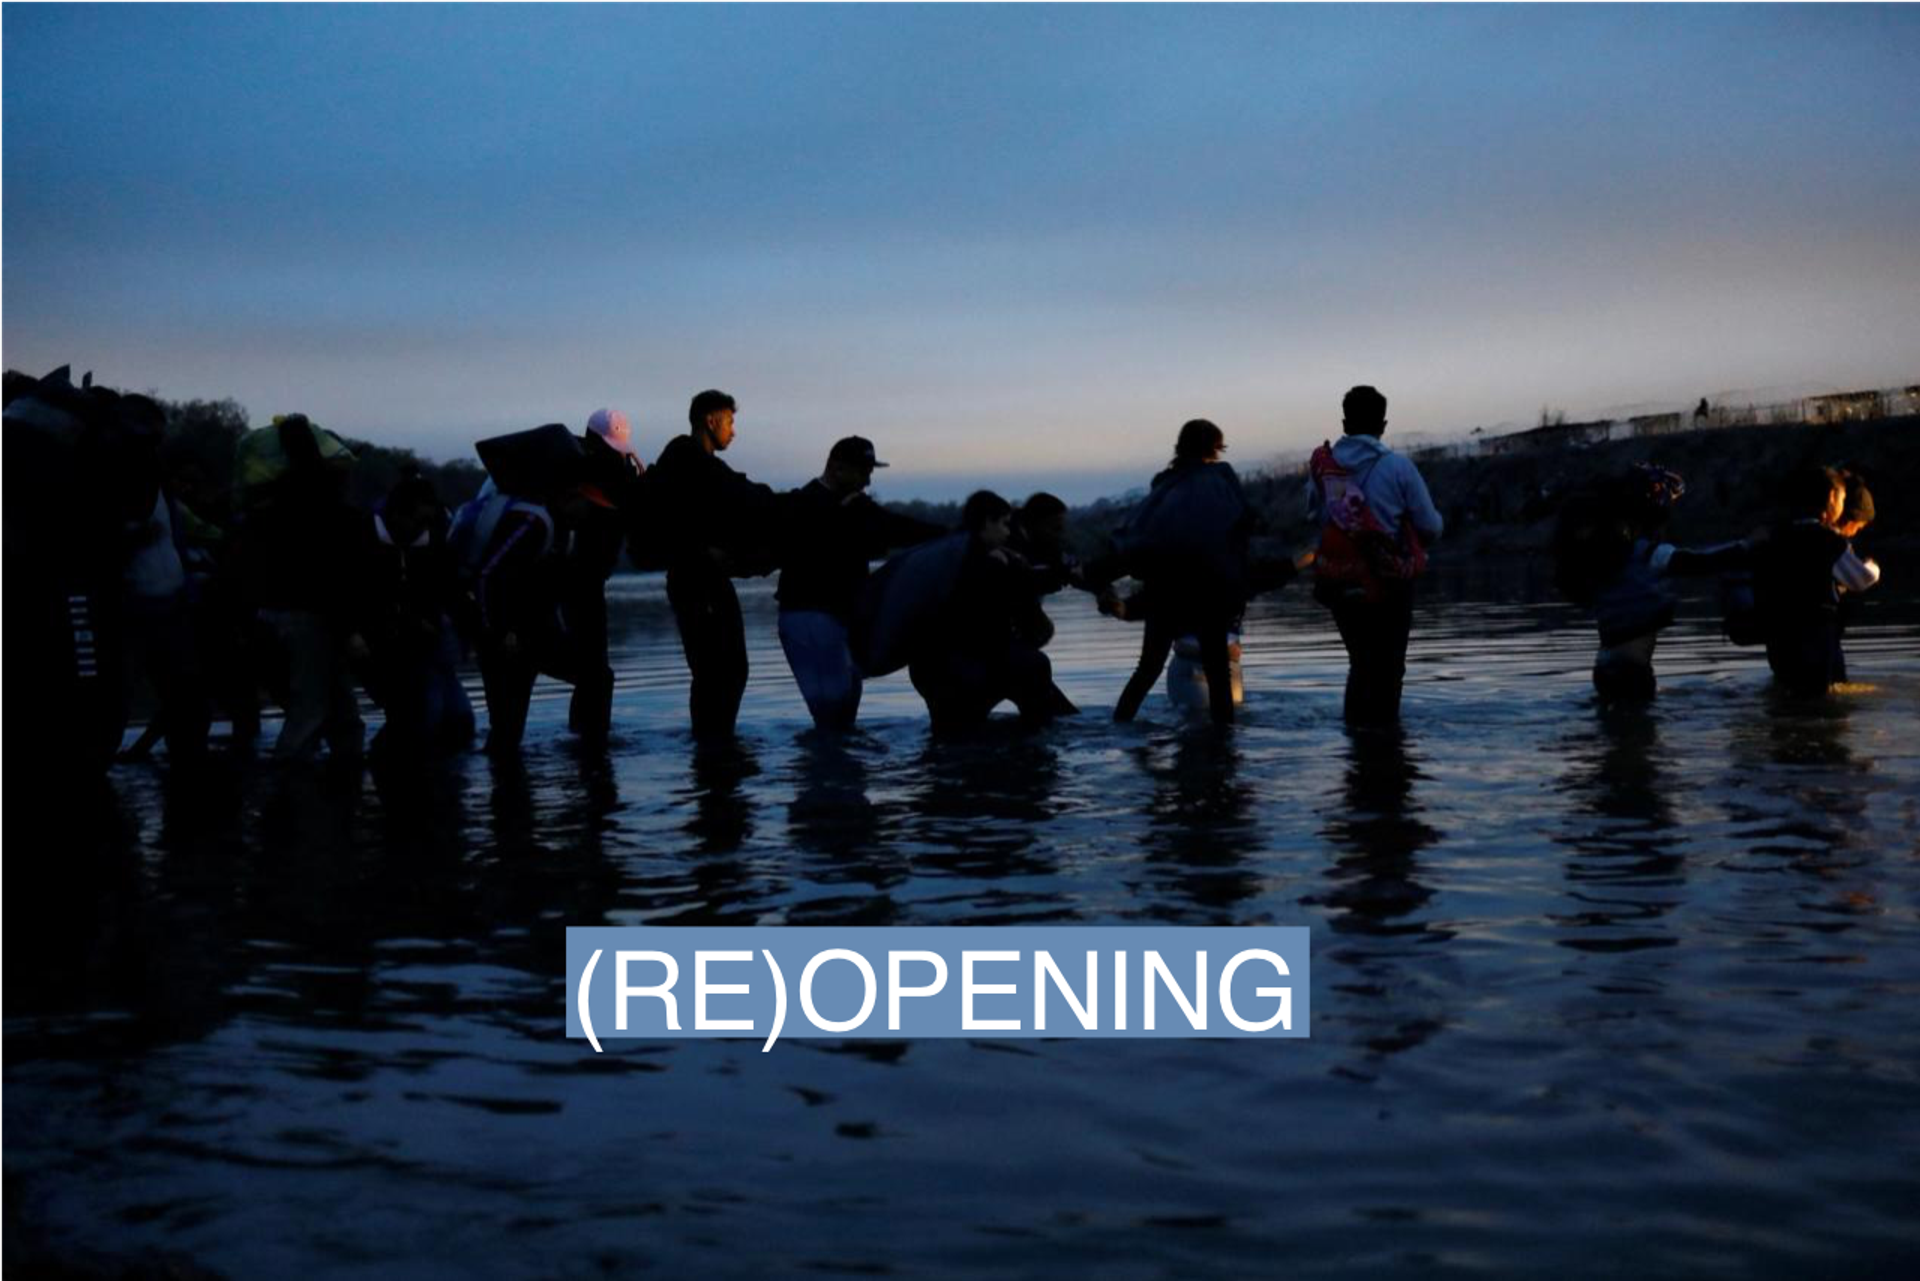 Migrants cross the Rio Bravo river at the border between the United States and Mexico, with the intention of turning themselves in to the U.S. Border Patrol agents to request asylum, as seen from Piedras Negras, Coahuila, Mexico on Dec. 21.